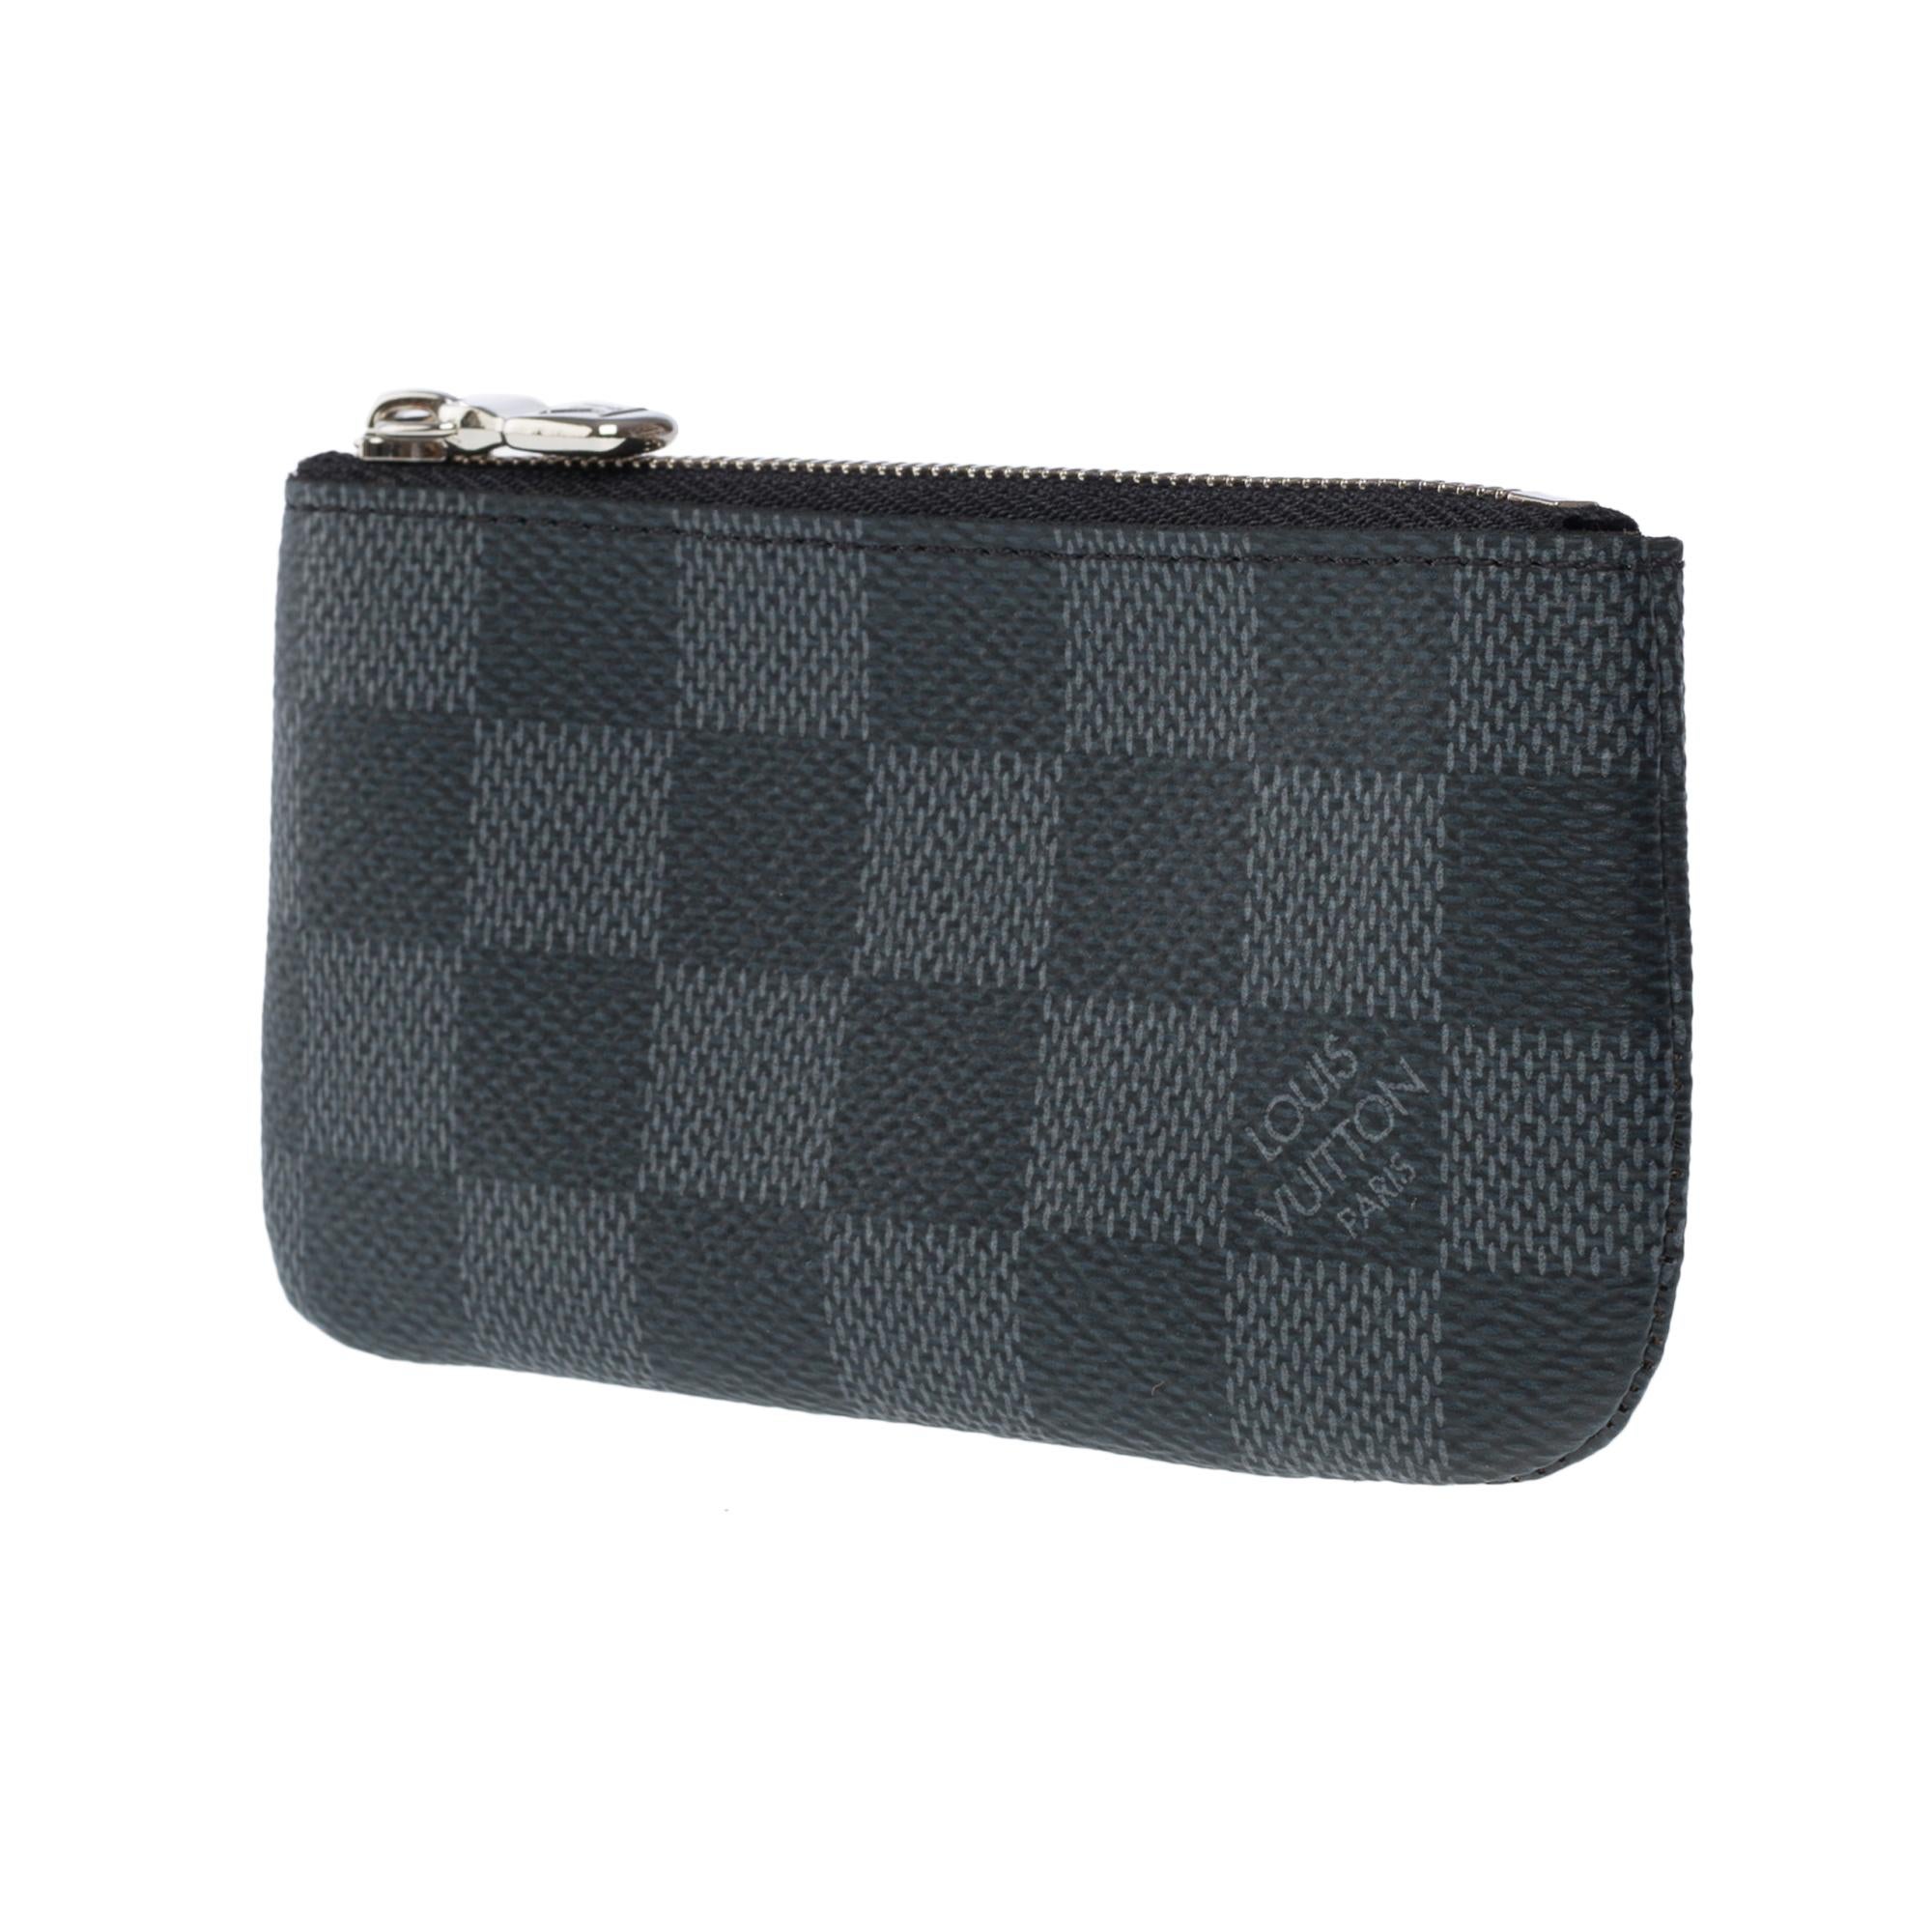 New Louis Vuitton Key Pouch in graphite damier canvas, SHW For Sale 5